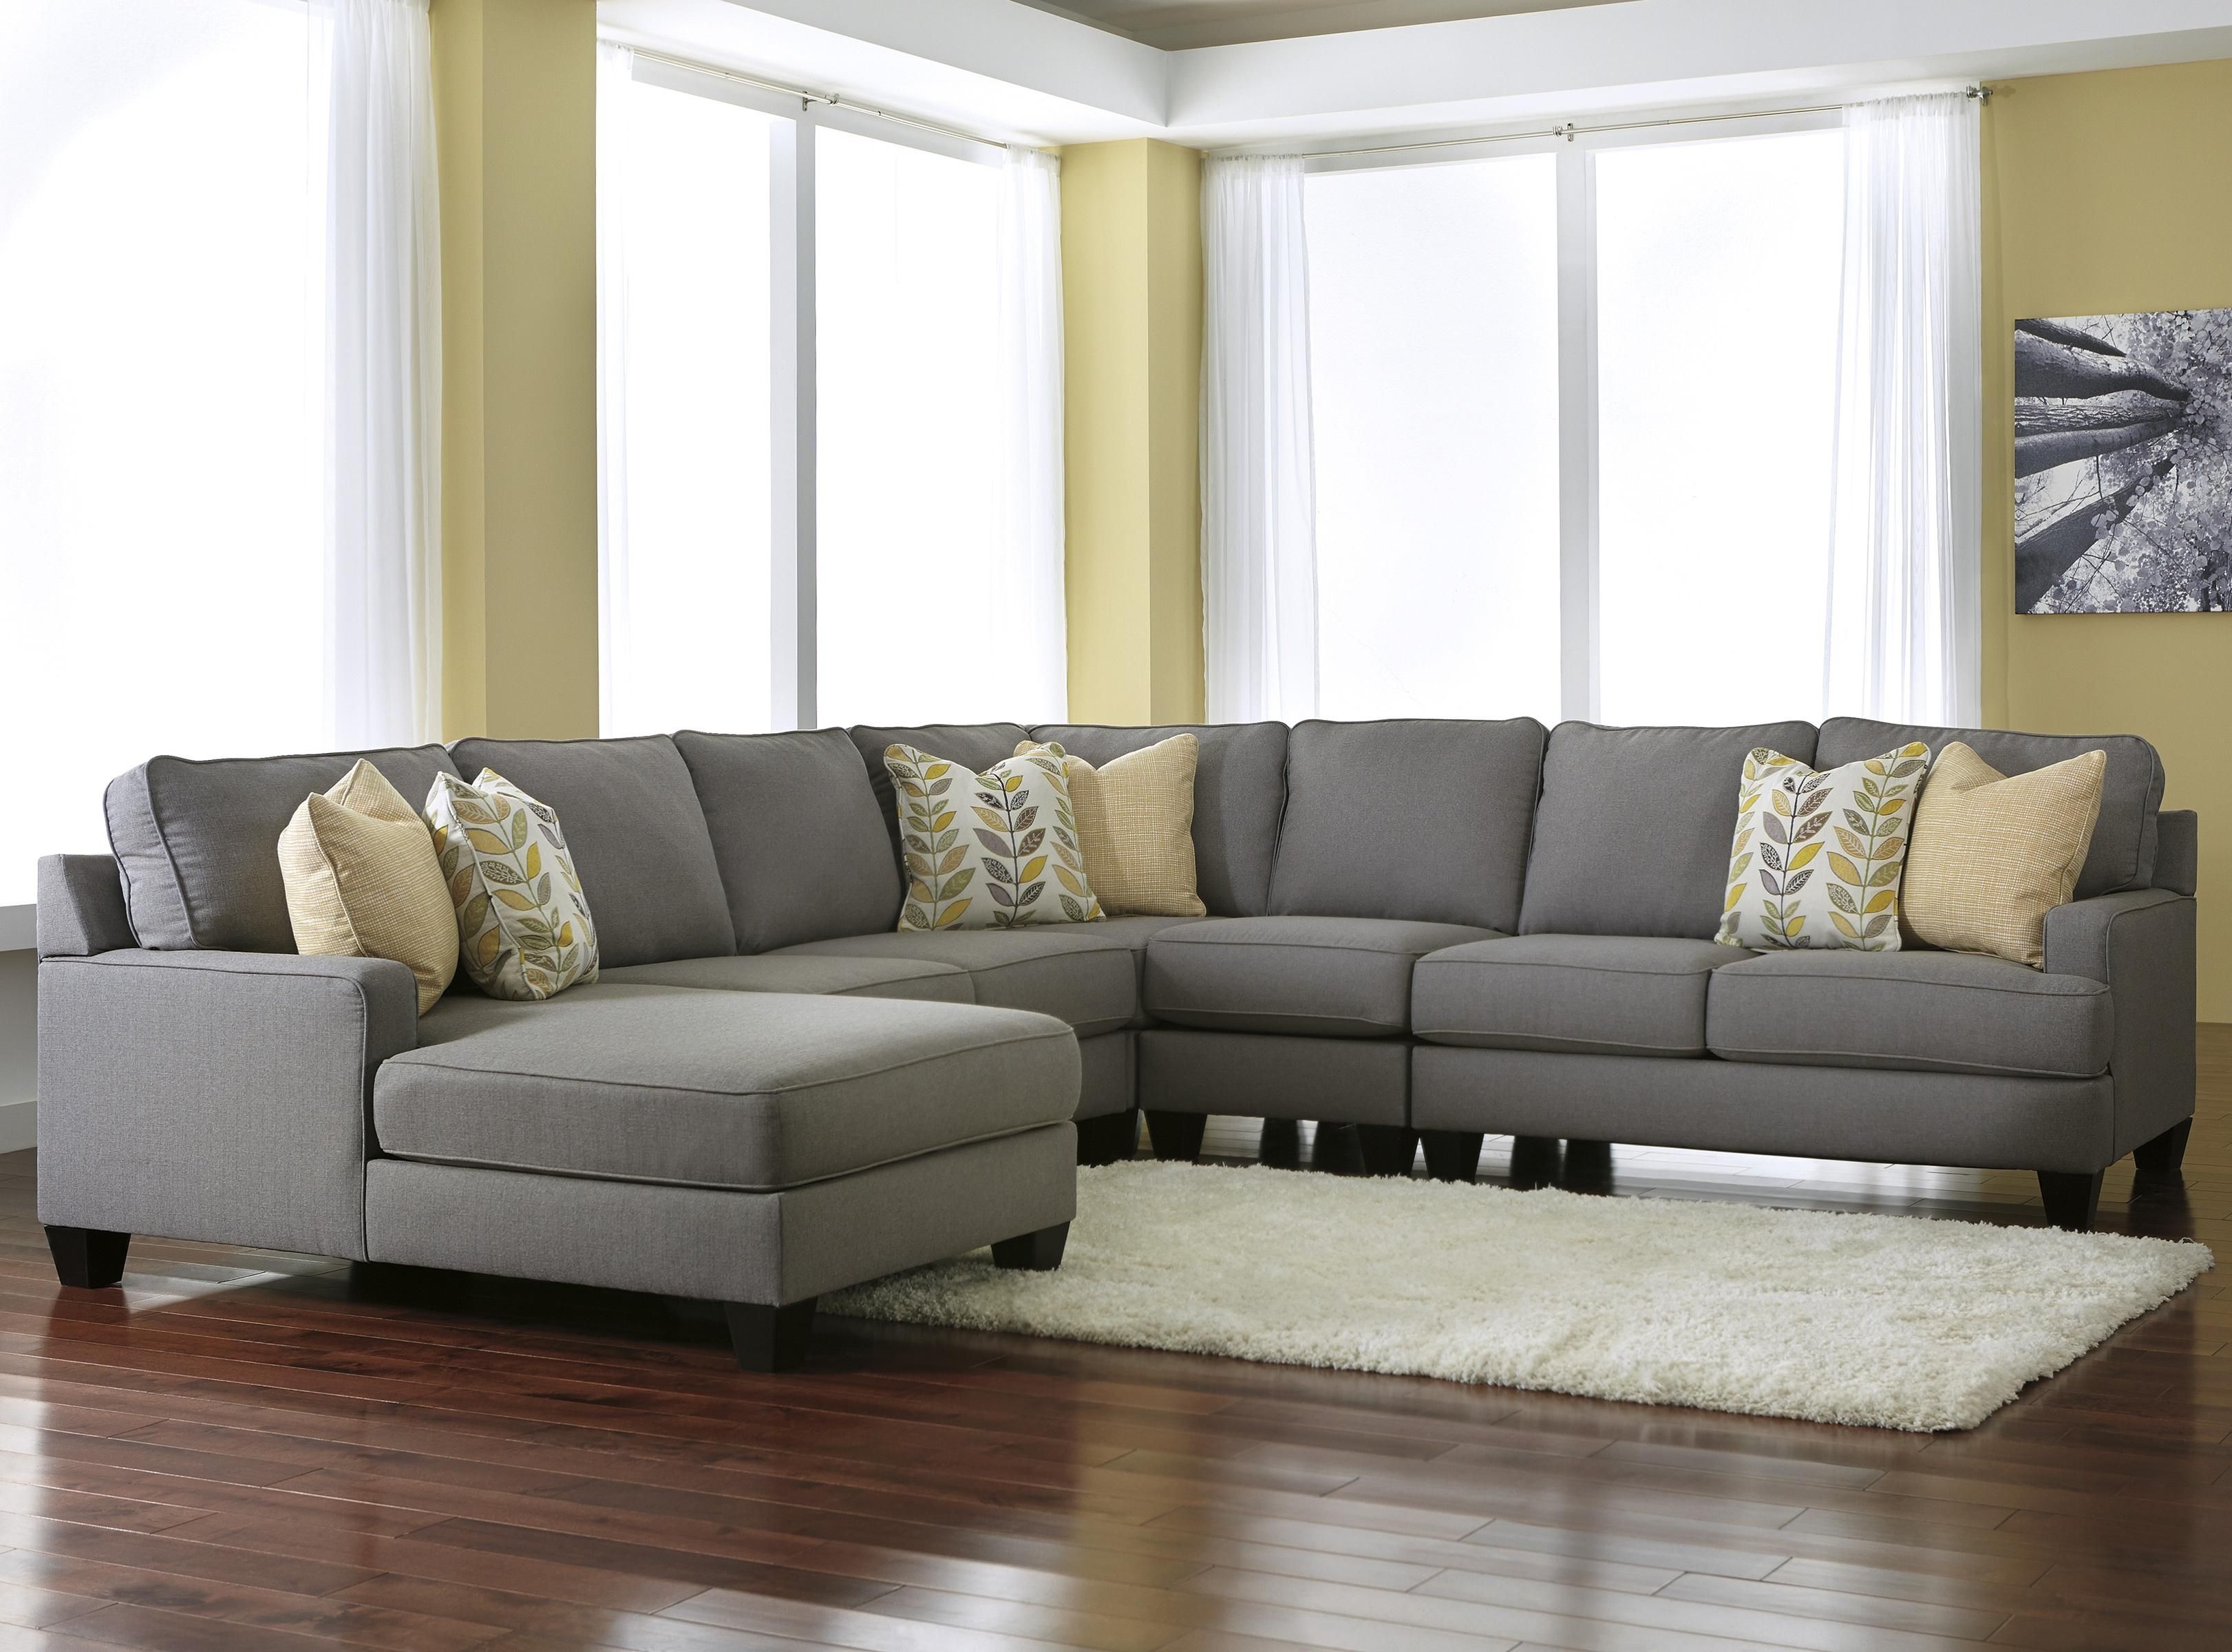 Signature Designashley Chamberly – Alloy Modern 5 Piece For Kansas City Mo Sectional Sofas (View 7 of 10)